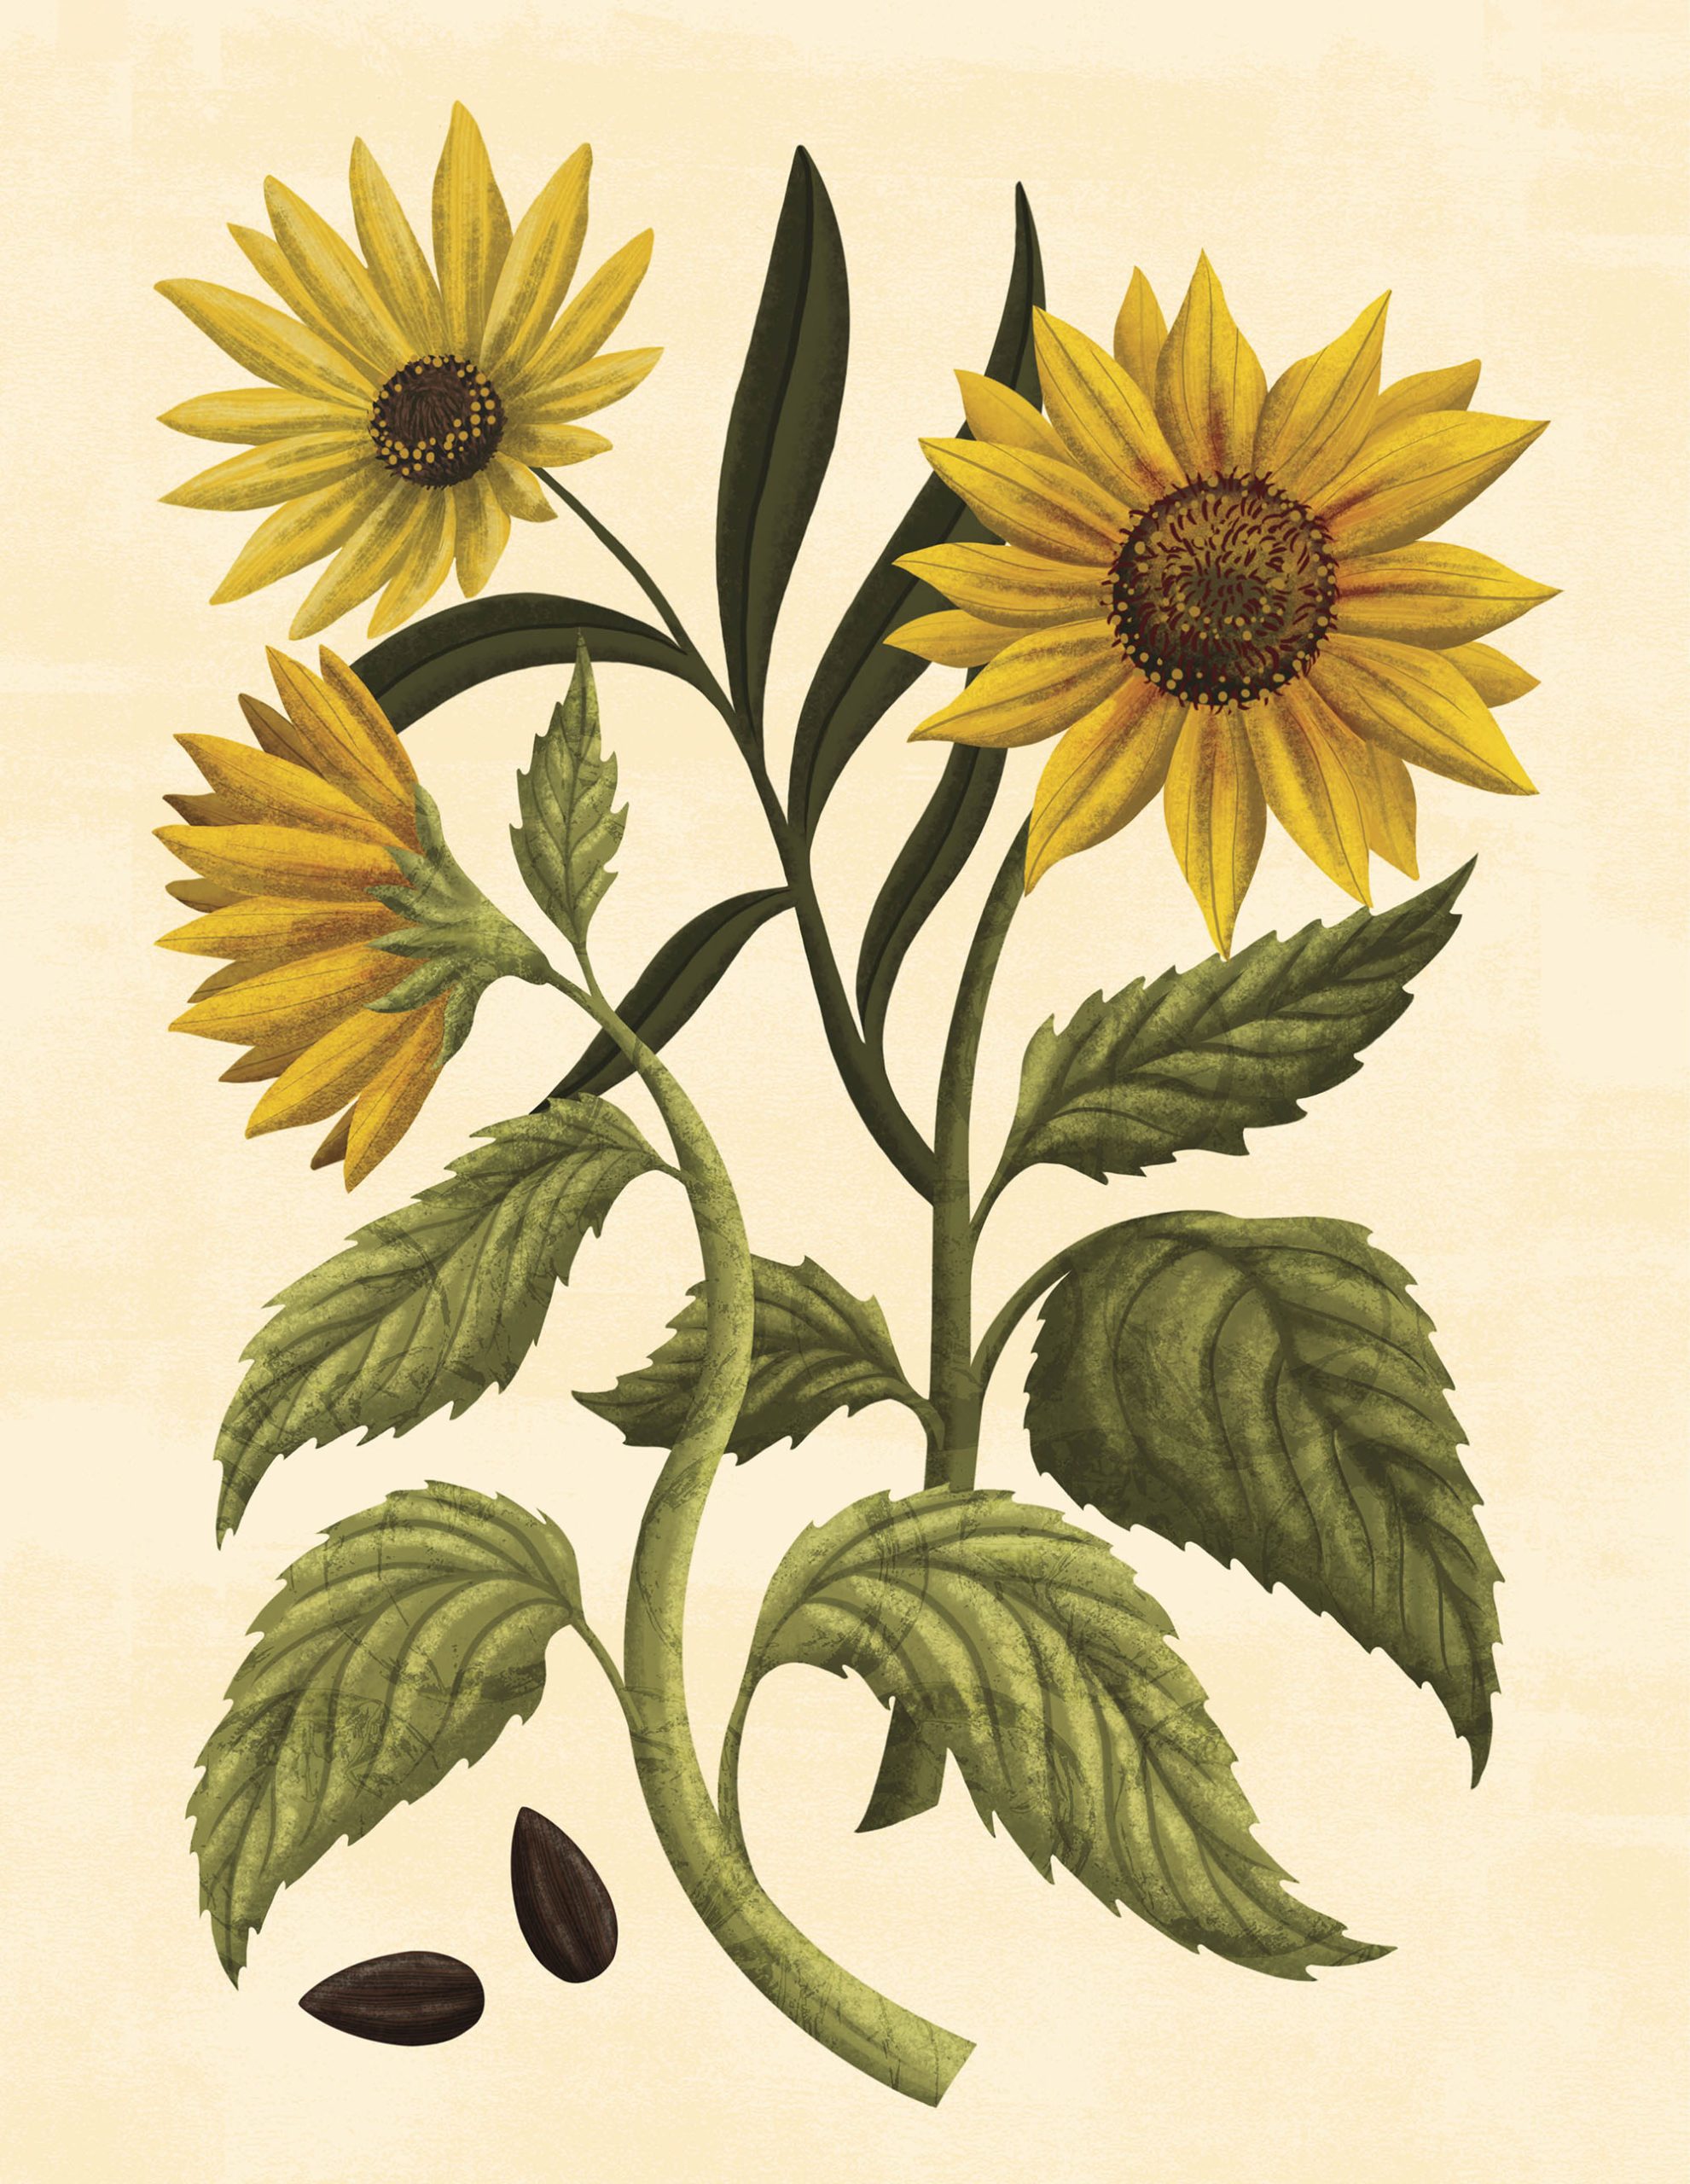 An illustration of large golden sunflowers on a yellow background